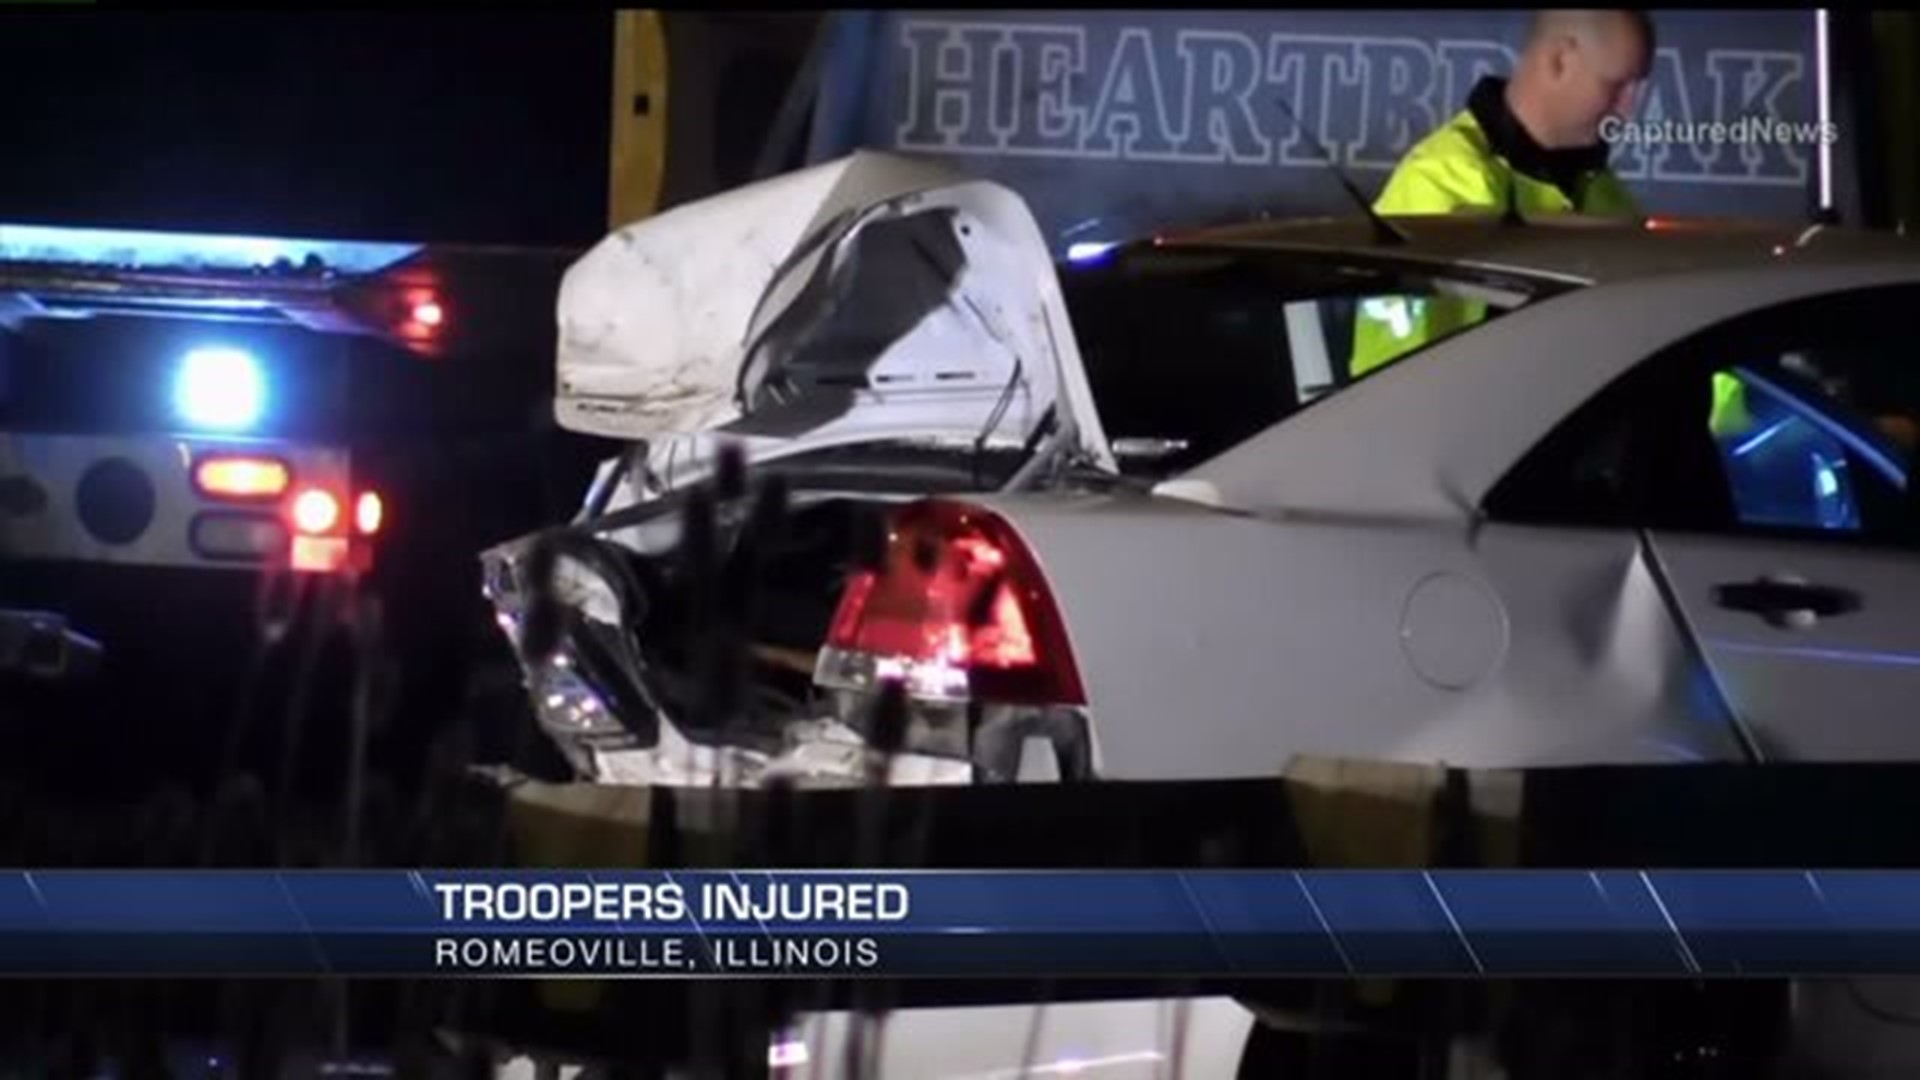 Illinois troopers hit early Friday morning